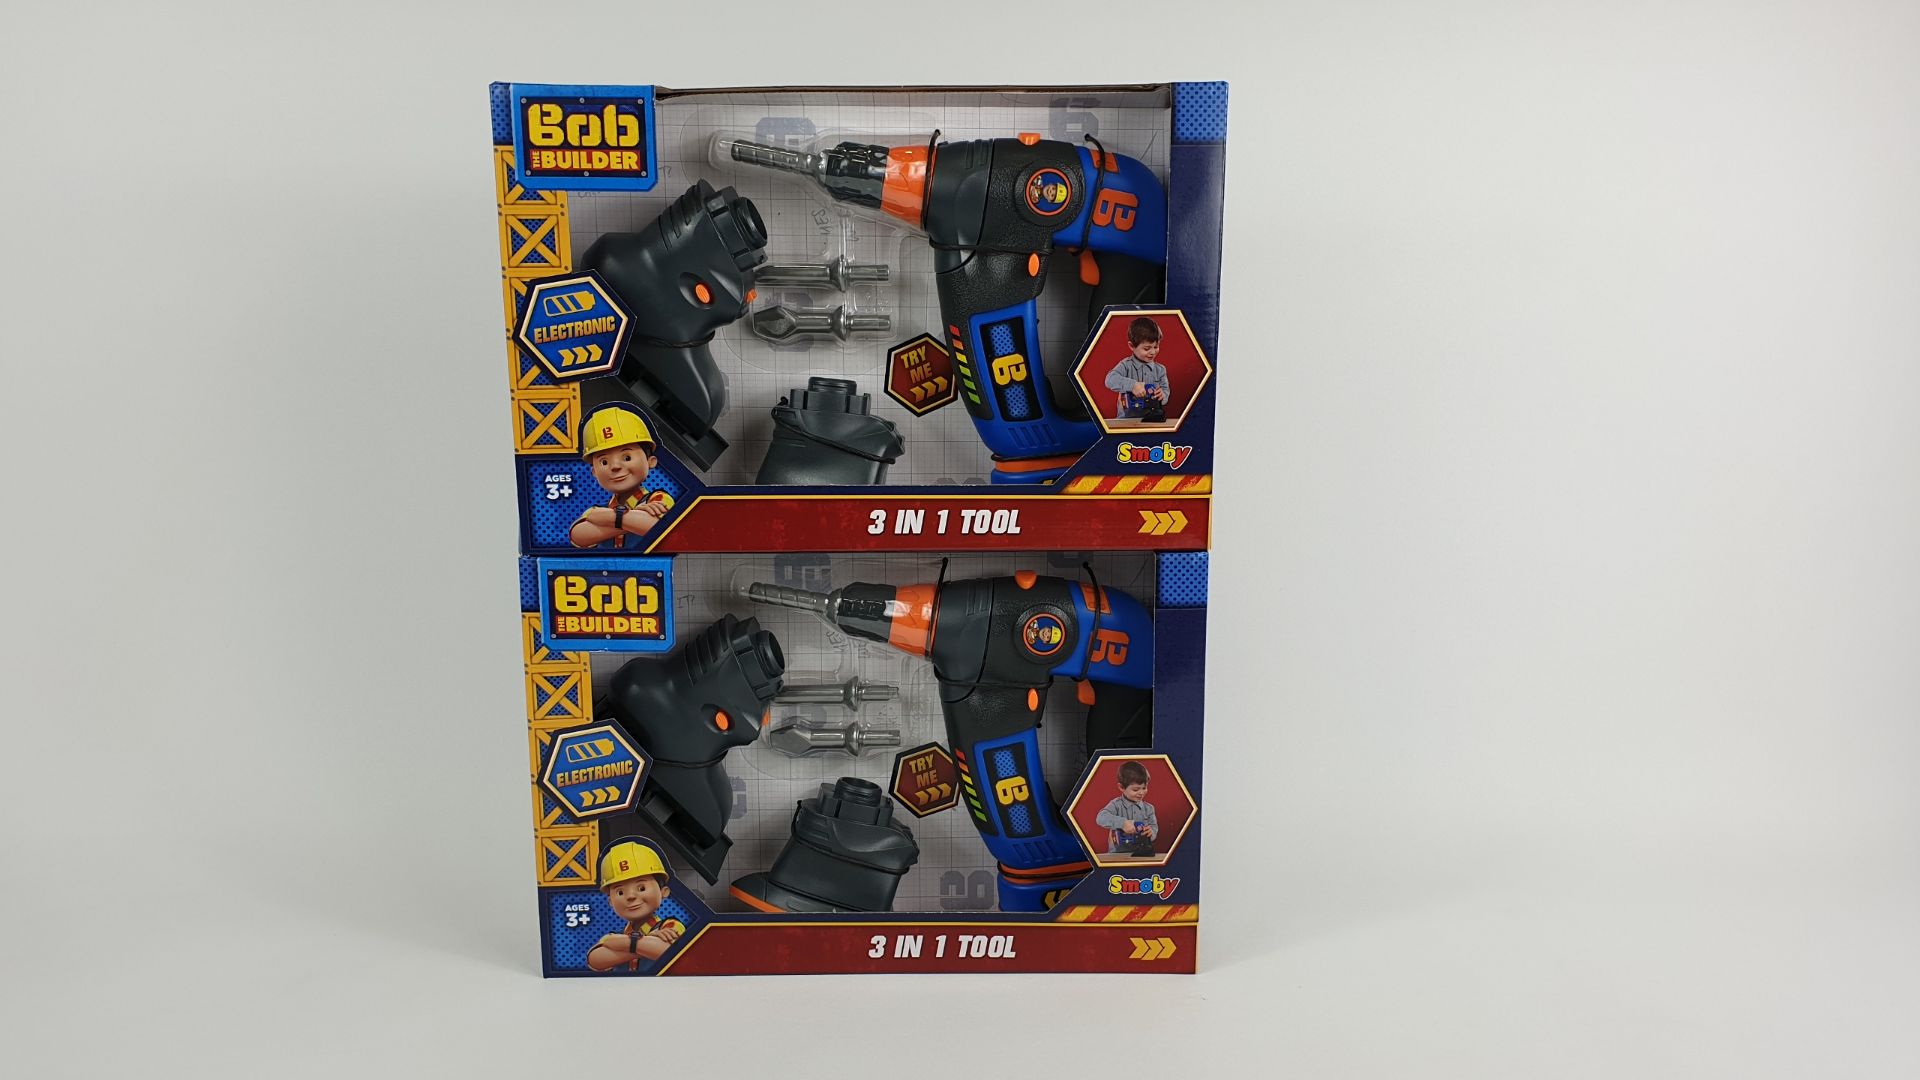 12 X BRAND NEW BOXED BOB THE BUILDER 3 IN 1 TOOL SETS IN 2 BOXES